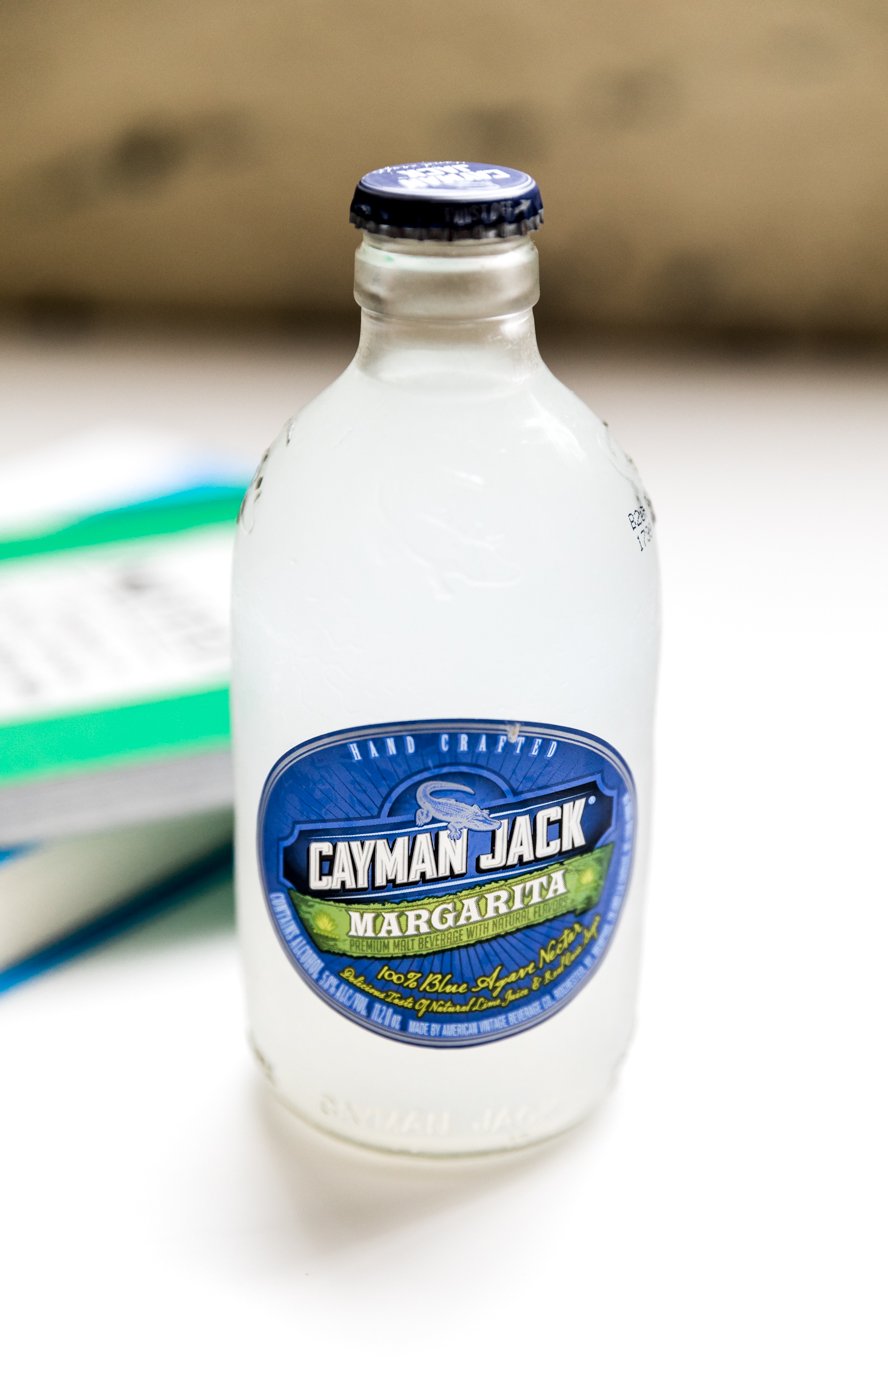 cayman jack margarita, pool day companions, what to drink by the pool, cayman jack, the kentucky gent